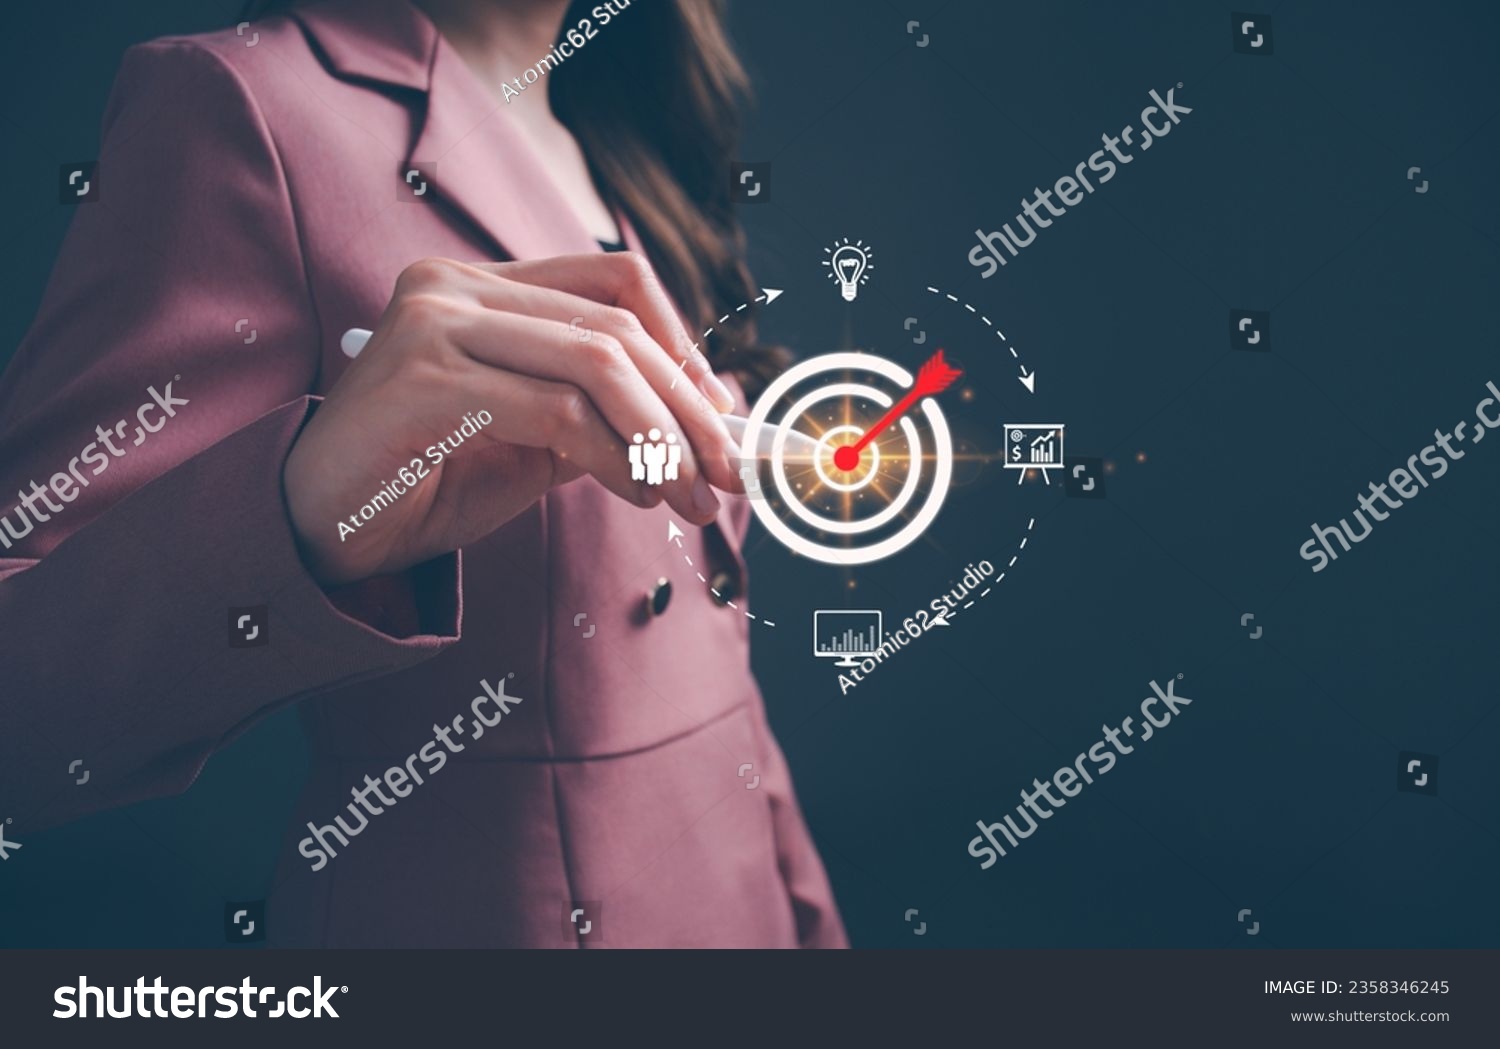 Businesswoman showing business process management icons. Concept of achieving business goal, strategic, planning, work performance is influenced by skills, abilities, competence. #2358346245